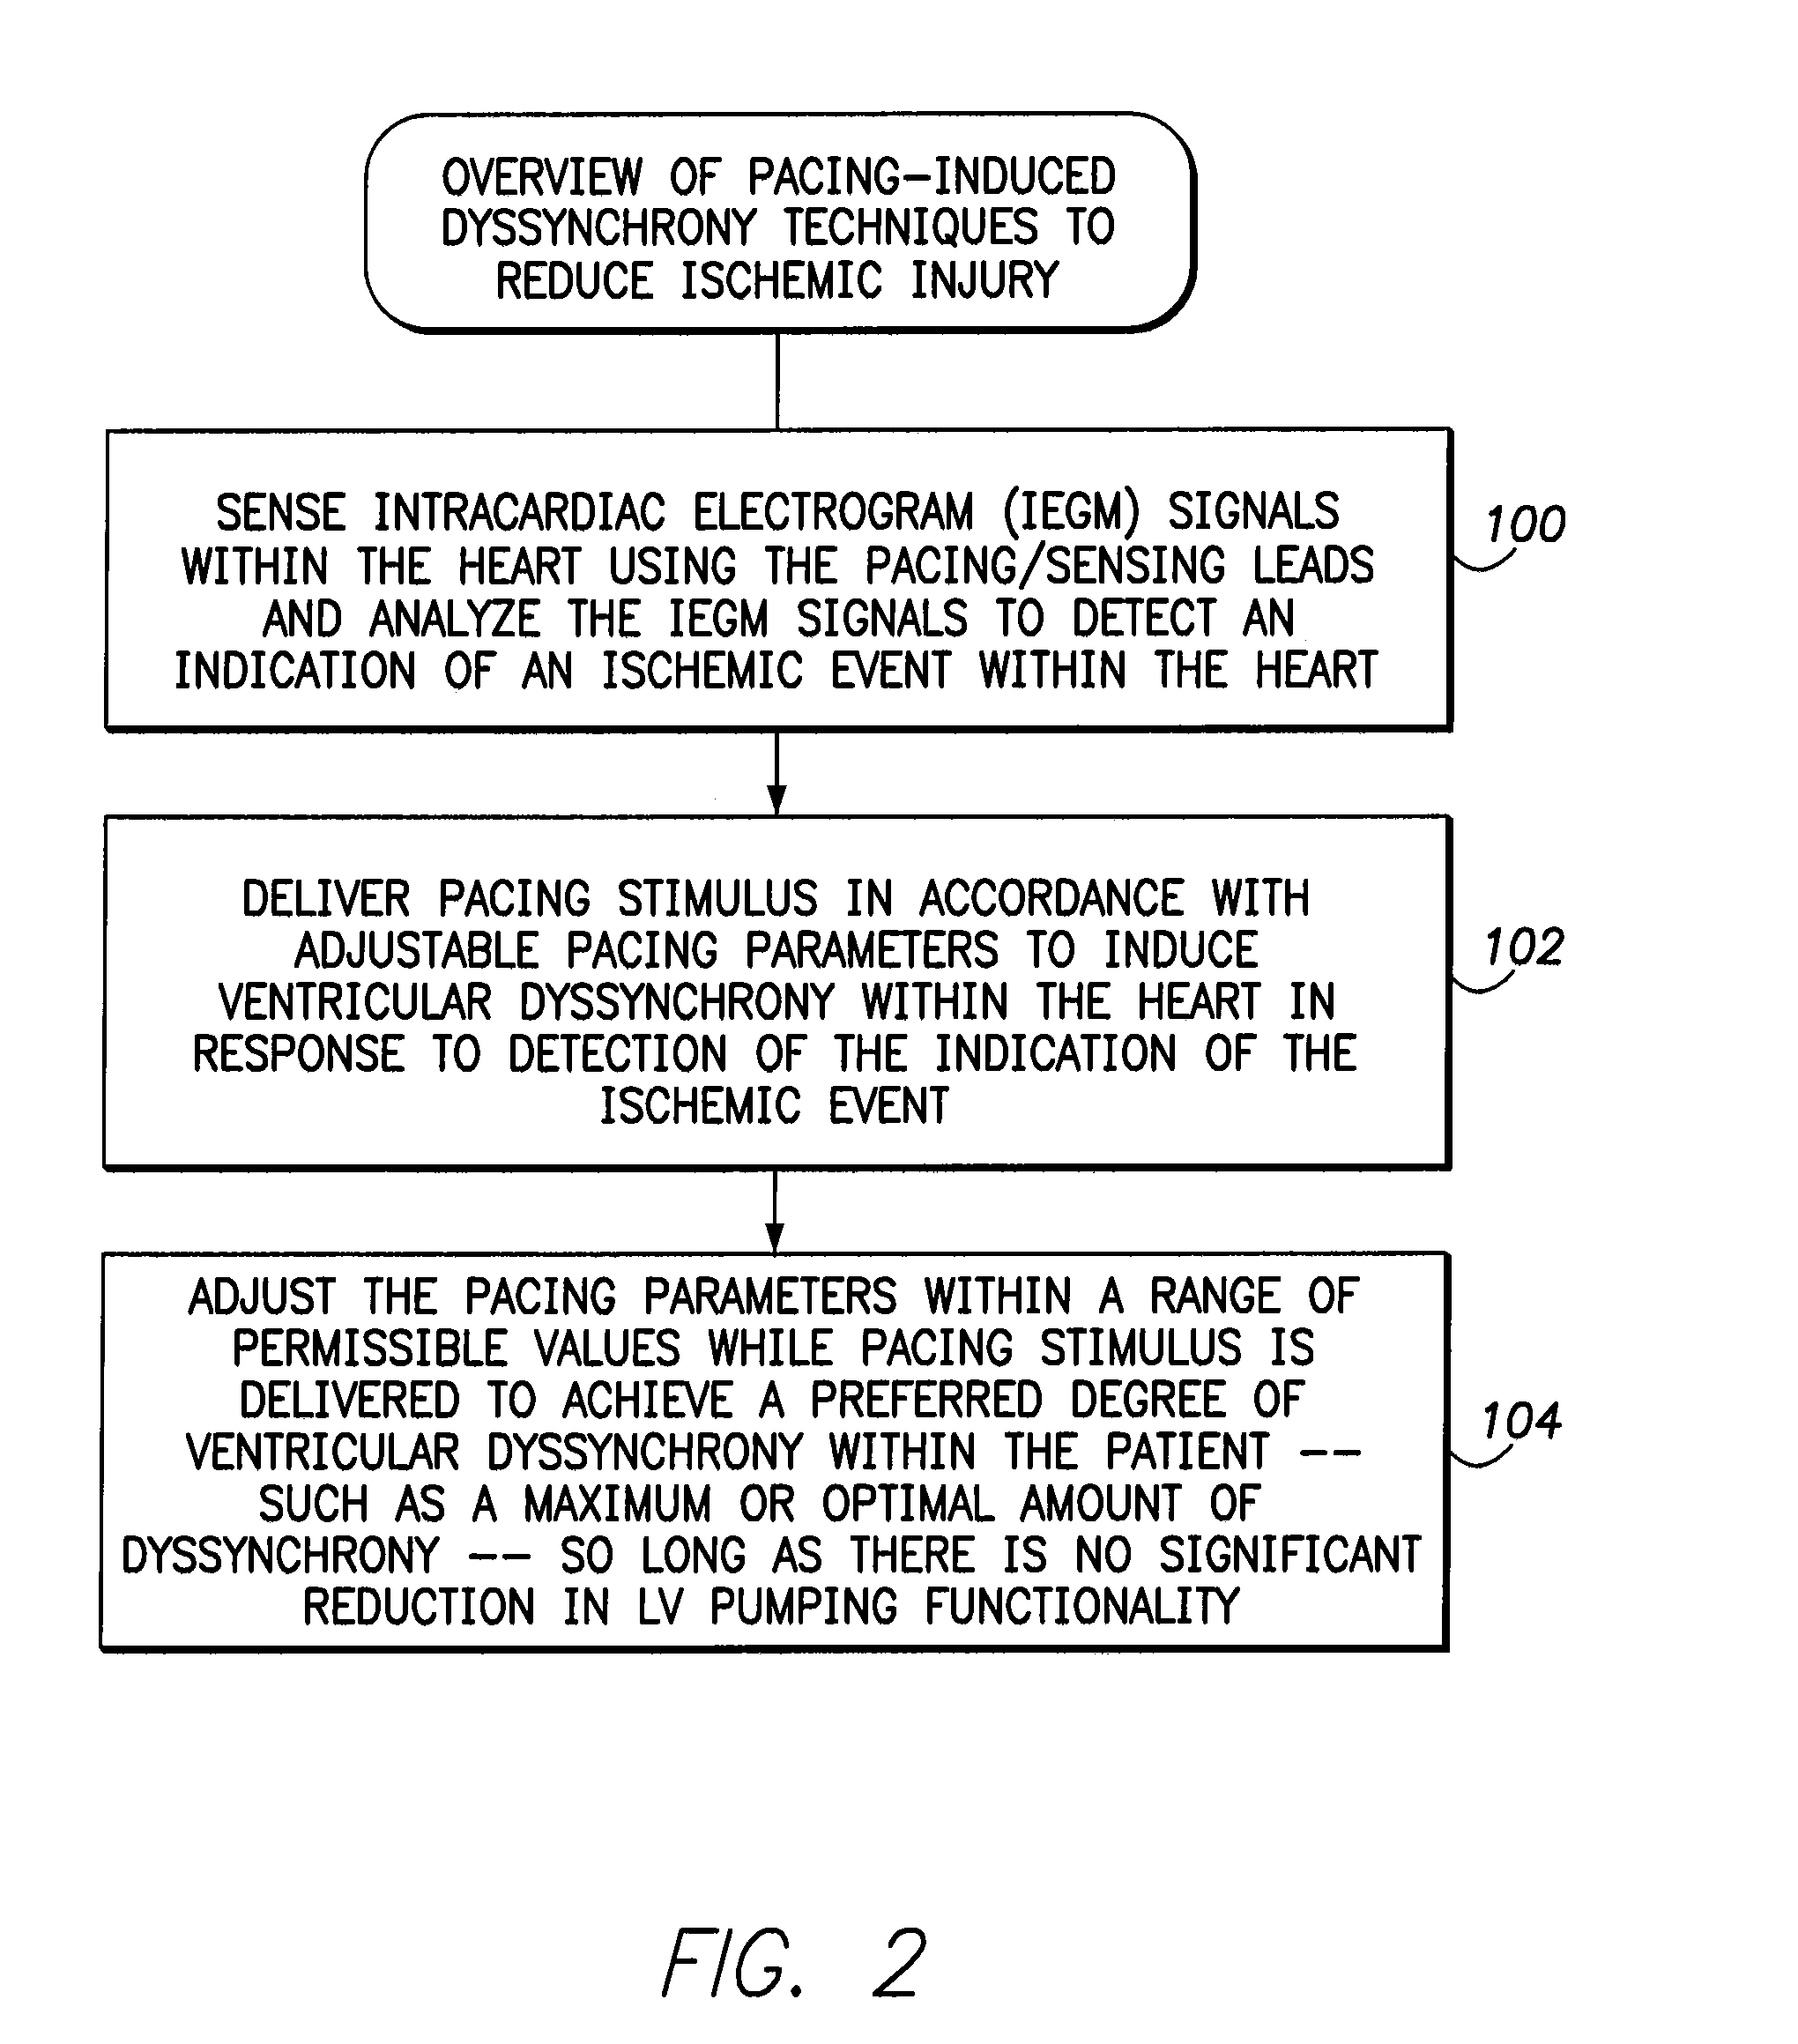 Systems and methods for controlling pacing induced dyssynchrony to reduce ischemic injury using an implantable medical device